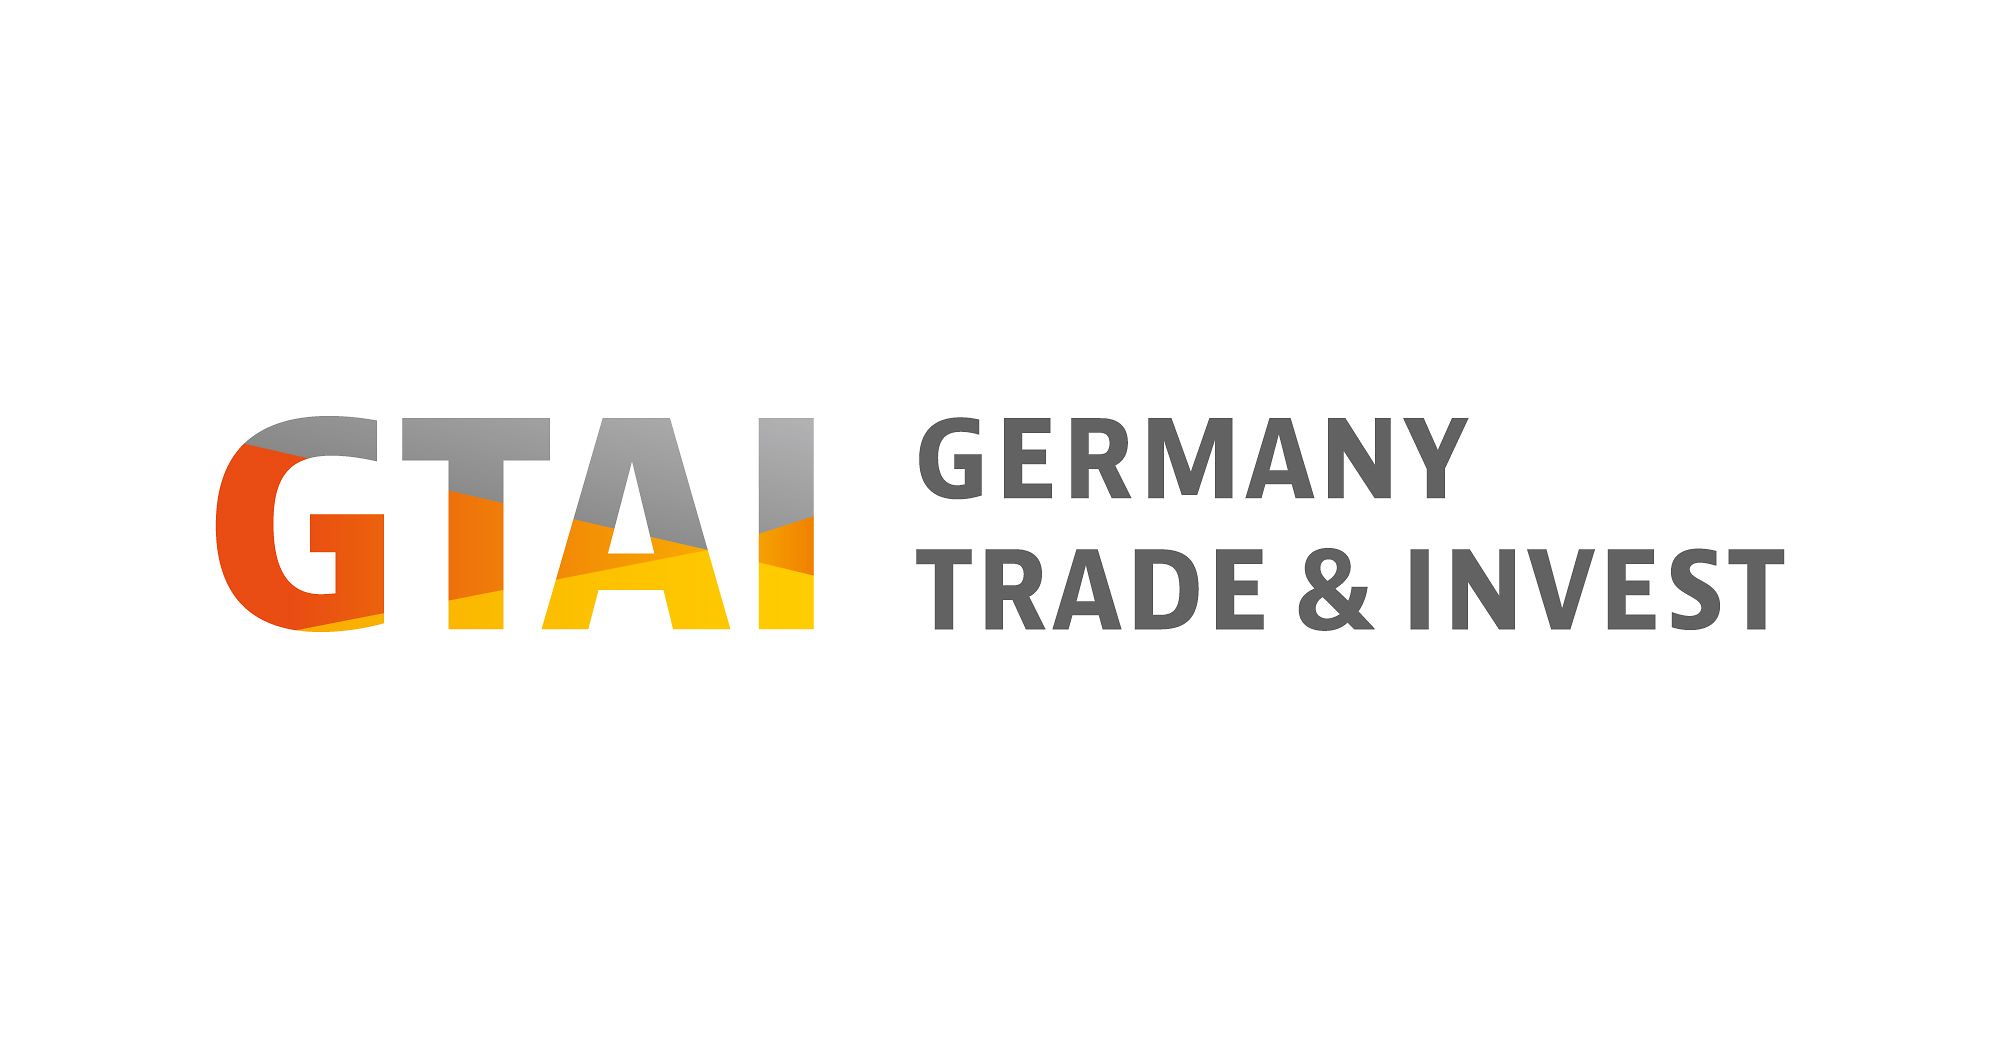 GERMANY TRADE & INVEST